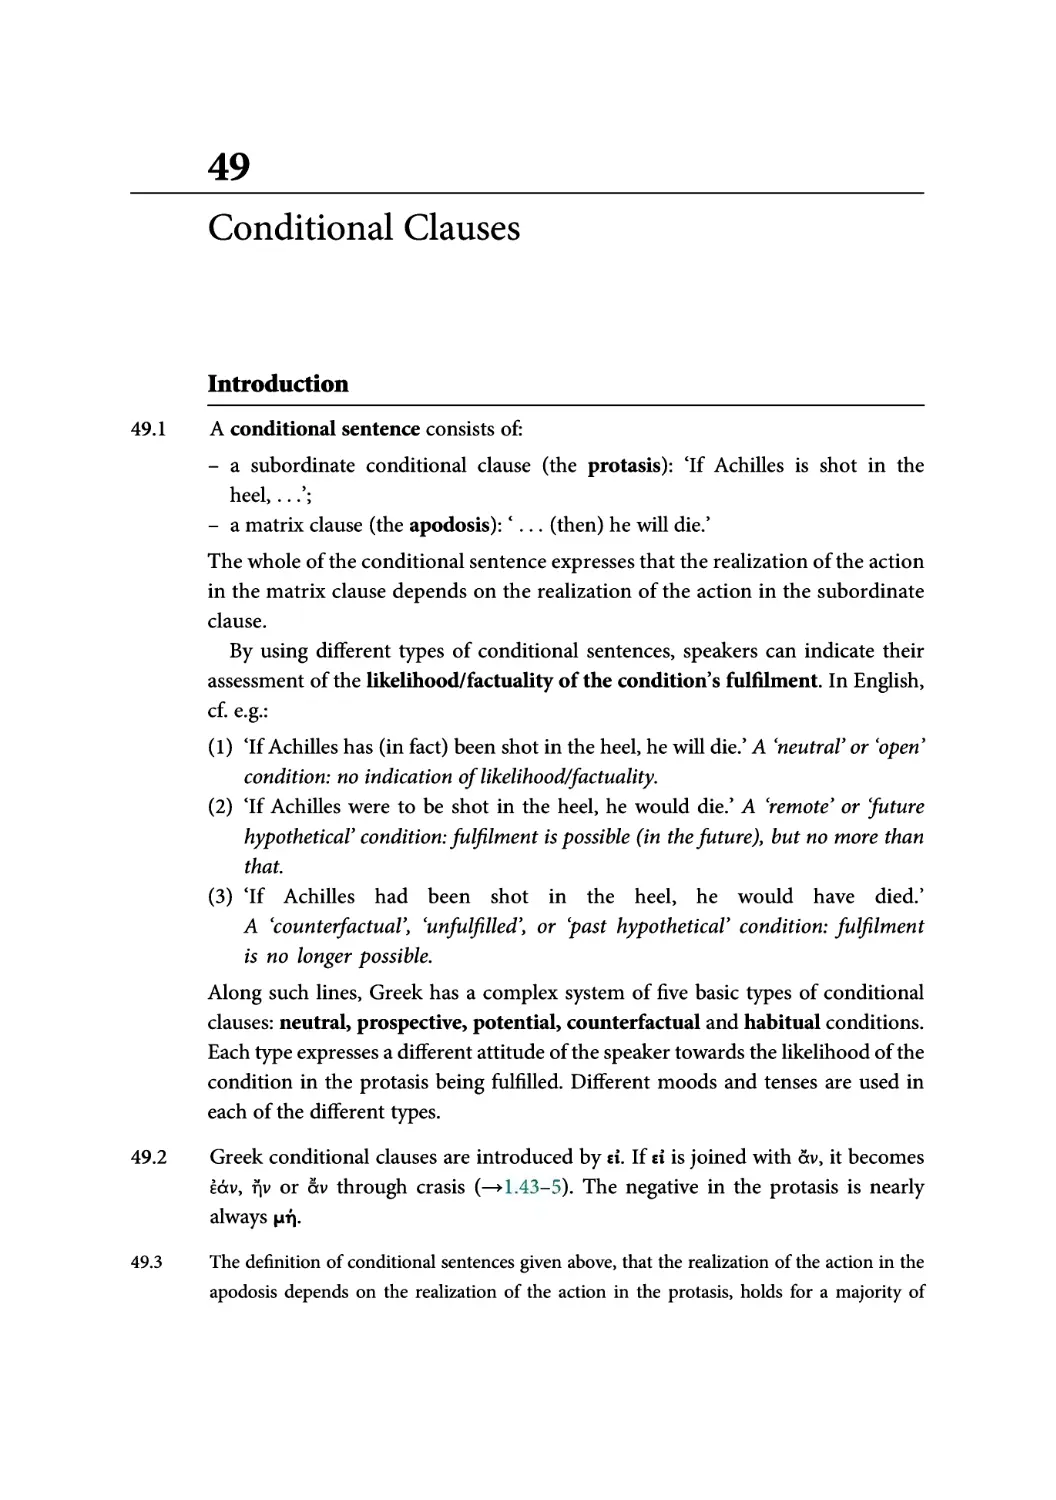 49. Conditional Clauses